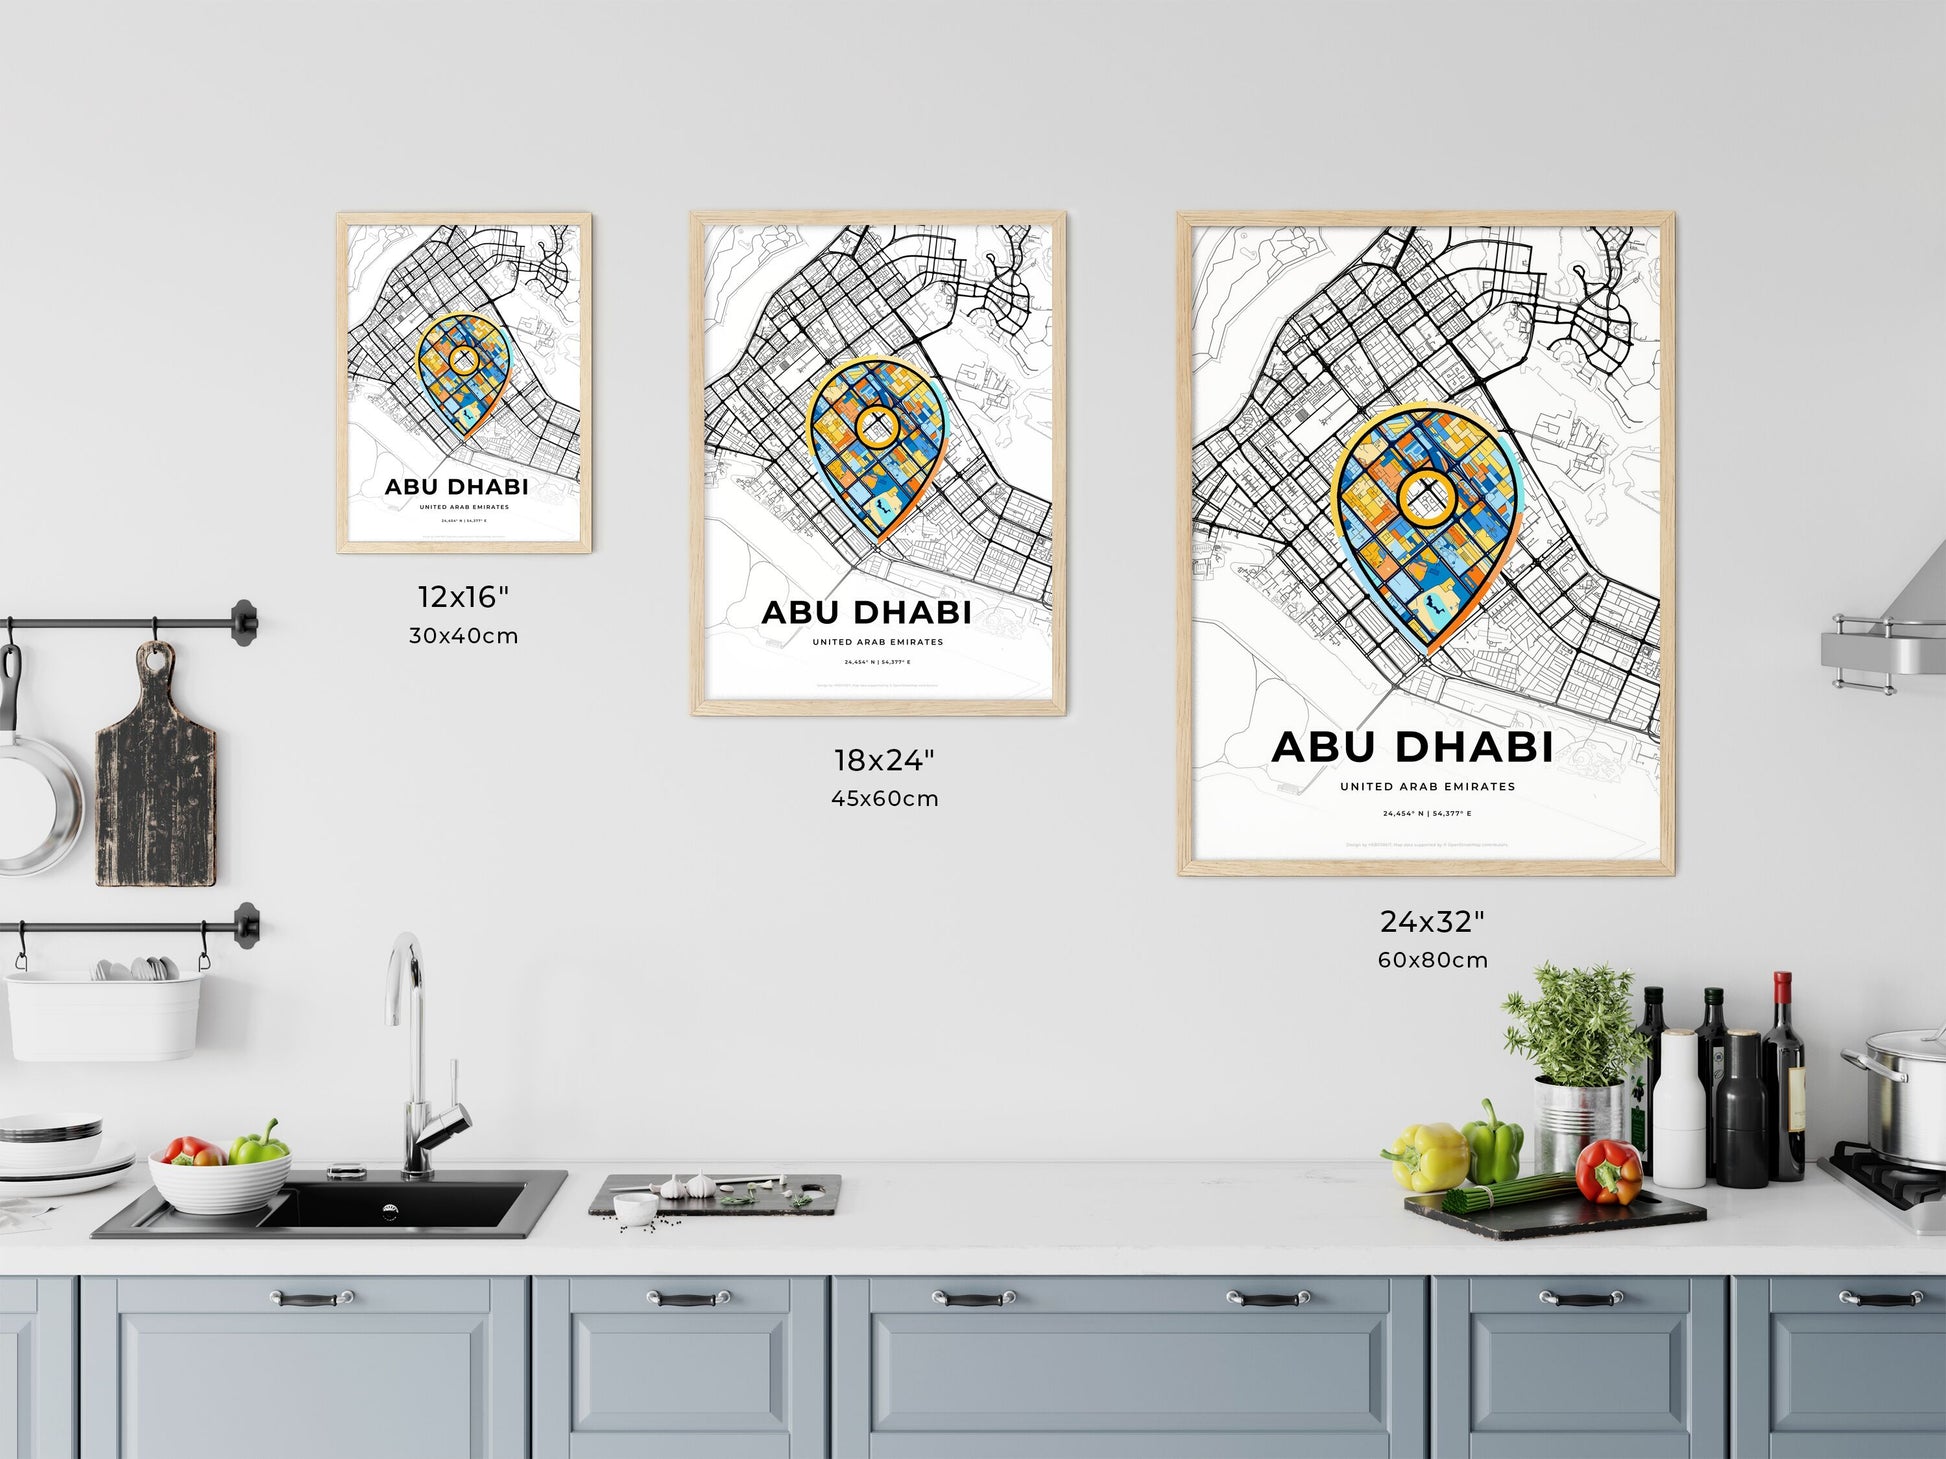 ABU DHABI UNITED ARAB EMIRATES minimal art map with a colorful icon. Where it all began, Couple map gift.